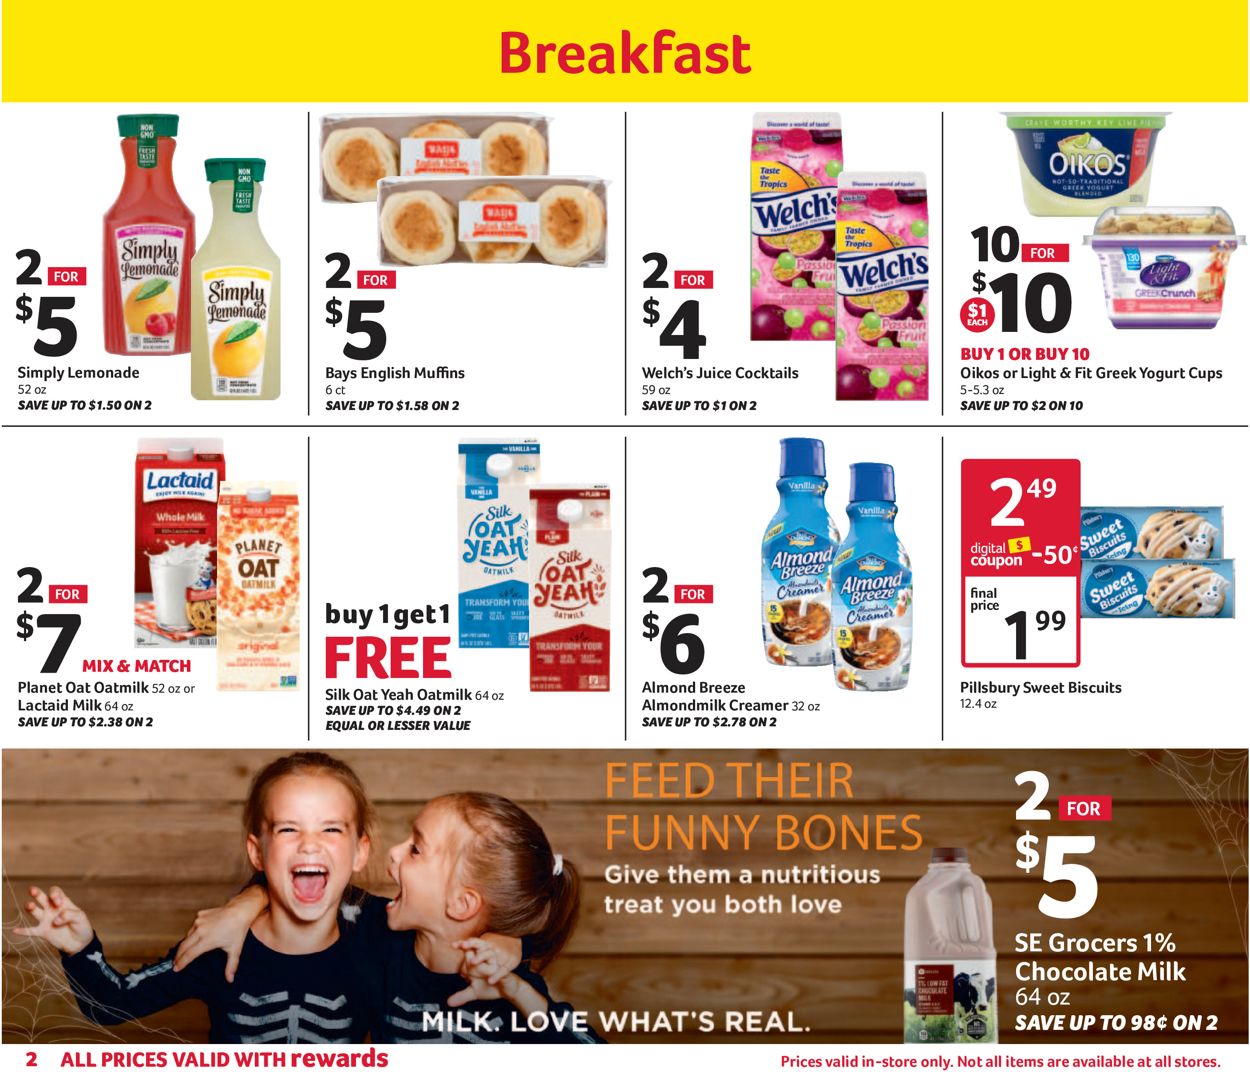 Catalogue BI-LO from 10/02/2019